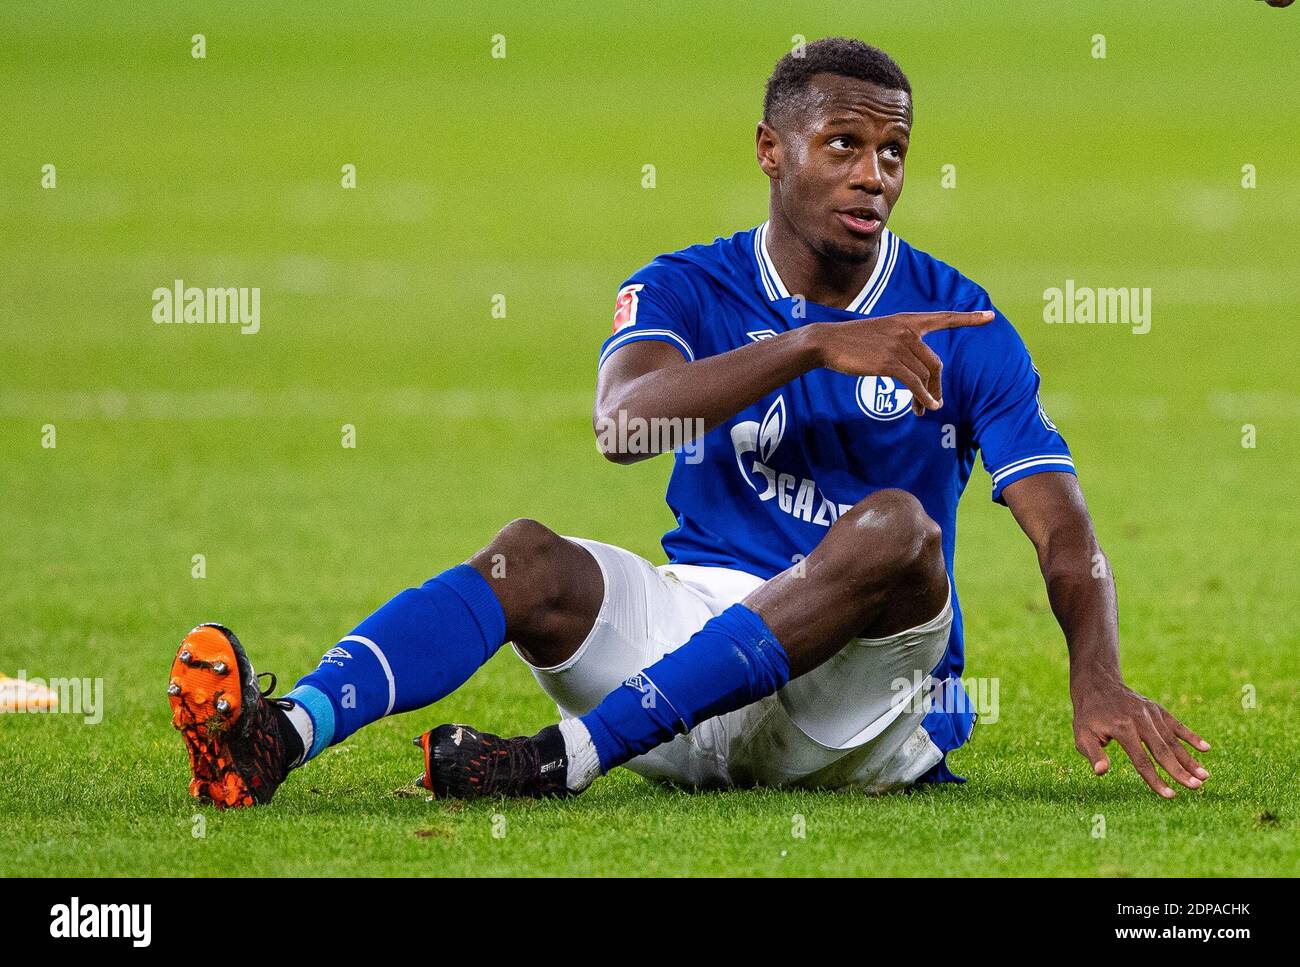 Gelsenkirchen, Germany. 19th Dec, 2020. Football: Bundesliga, FC Schalke 04 - Arminia Bielefeld, Matchday 13 at Veltins Arena. Schalke's Hamza Mendyl is on the pitch. Credit: Guido Kirchner/dpa - IMPORTANT NOTE: In accordance with the regulations of the DFL Deutsche Fußball Liga and/or the DFB Deutscher Fußball-Bund, it is prohibited to use or have used photographs taken in the stadium and/or of the match in the form of sequence pictures and/or video-like photo series./dpa/Alamy Live News Stock Photo